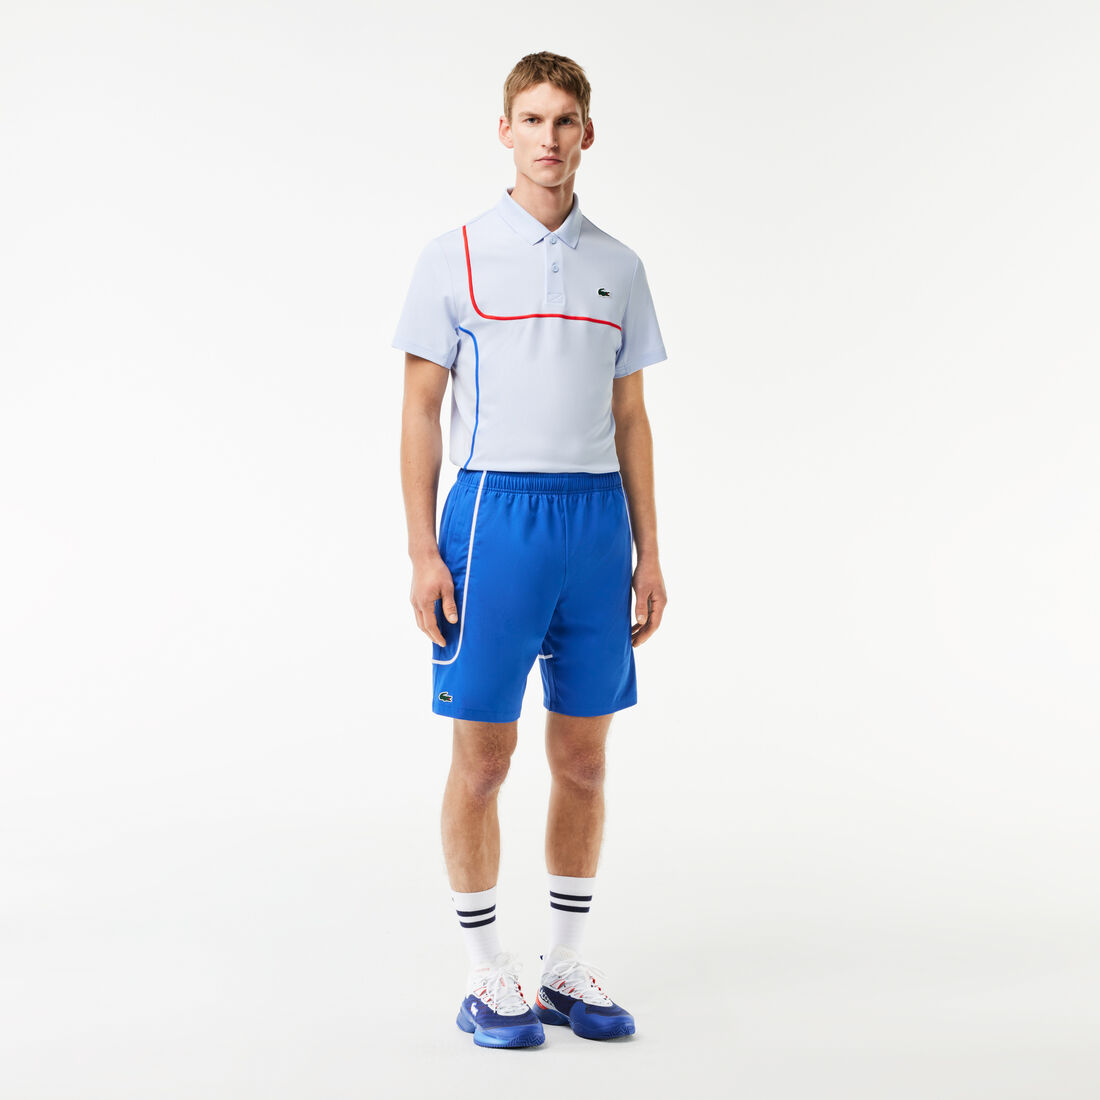 Unlined Sportsuit Tennis Shorts - GH7460-00-IXW